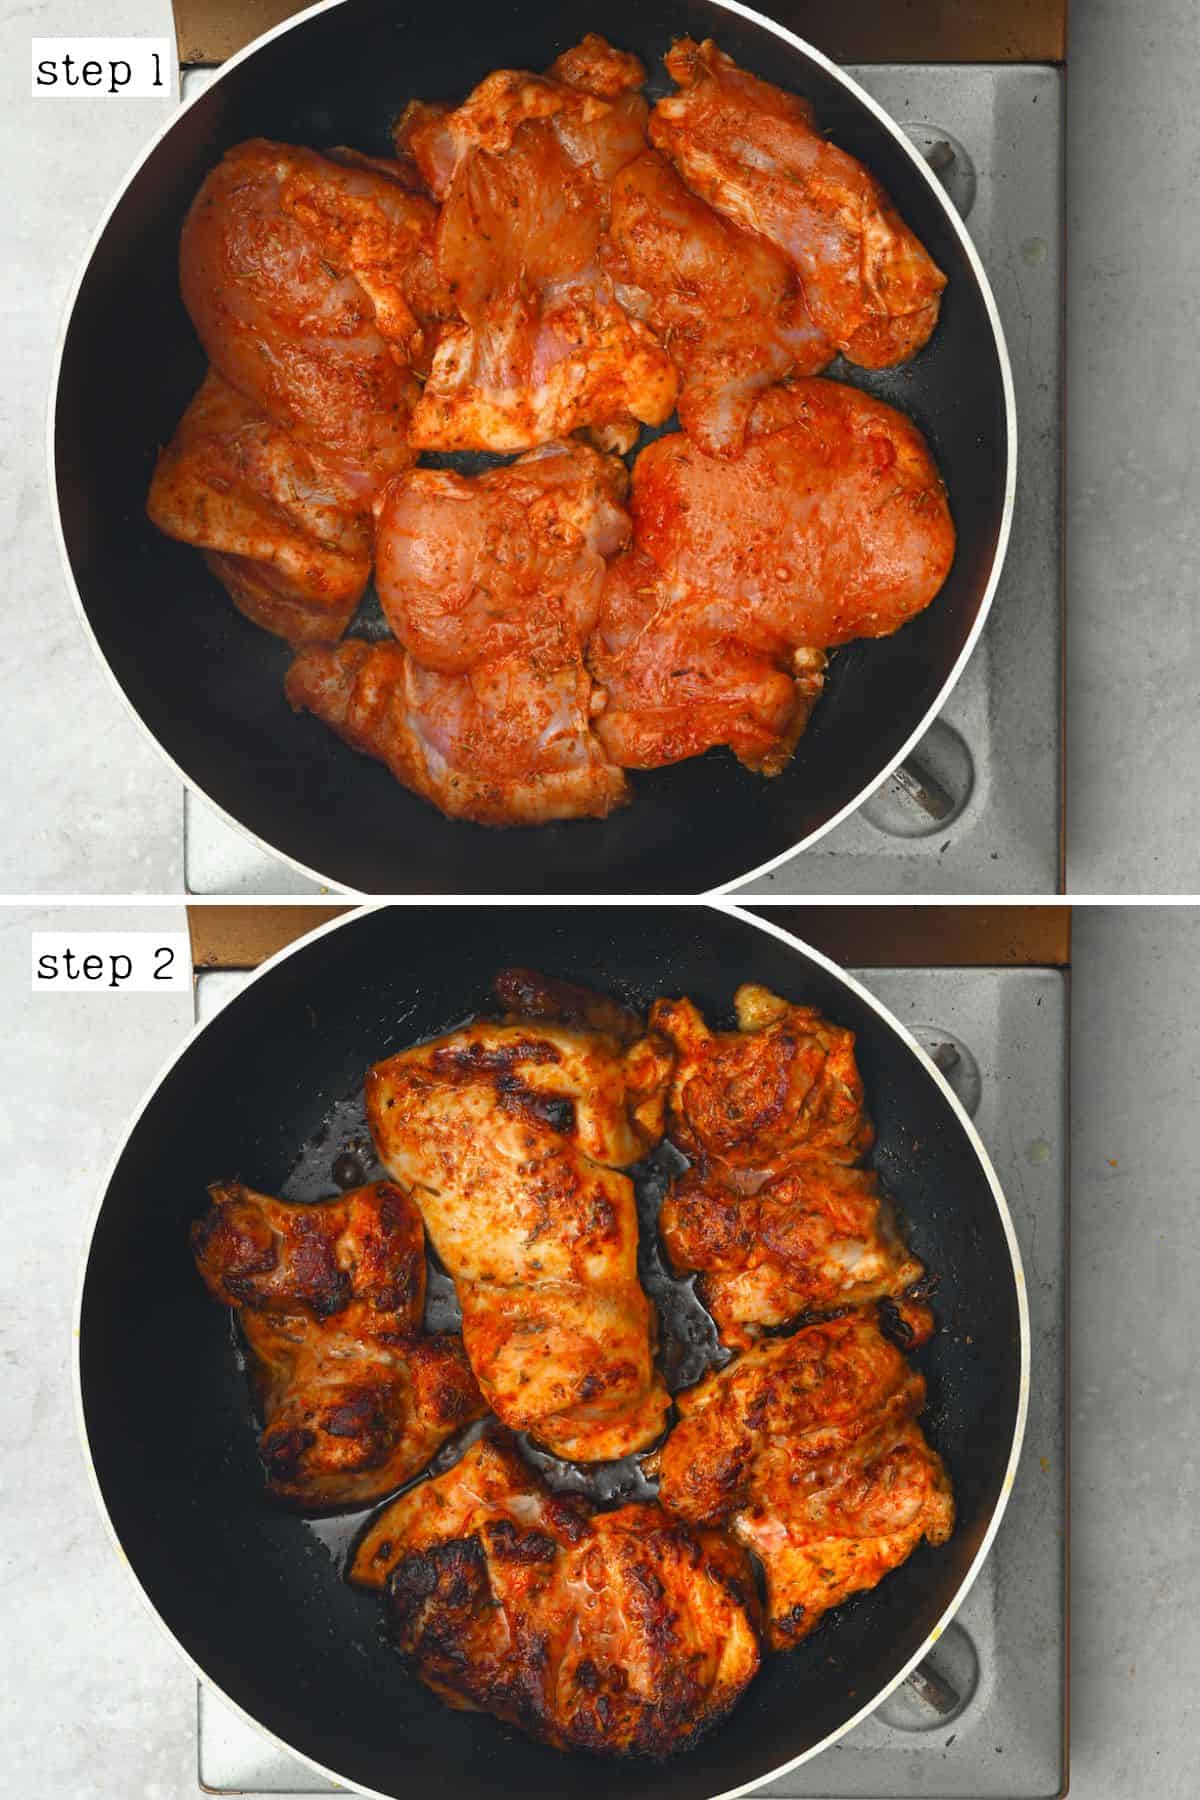 Steps for pan frying chicken